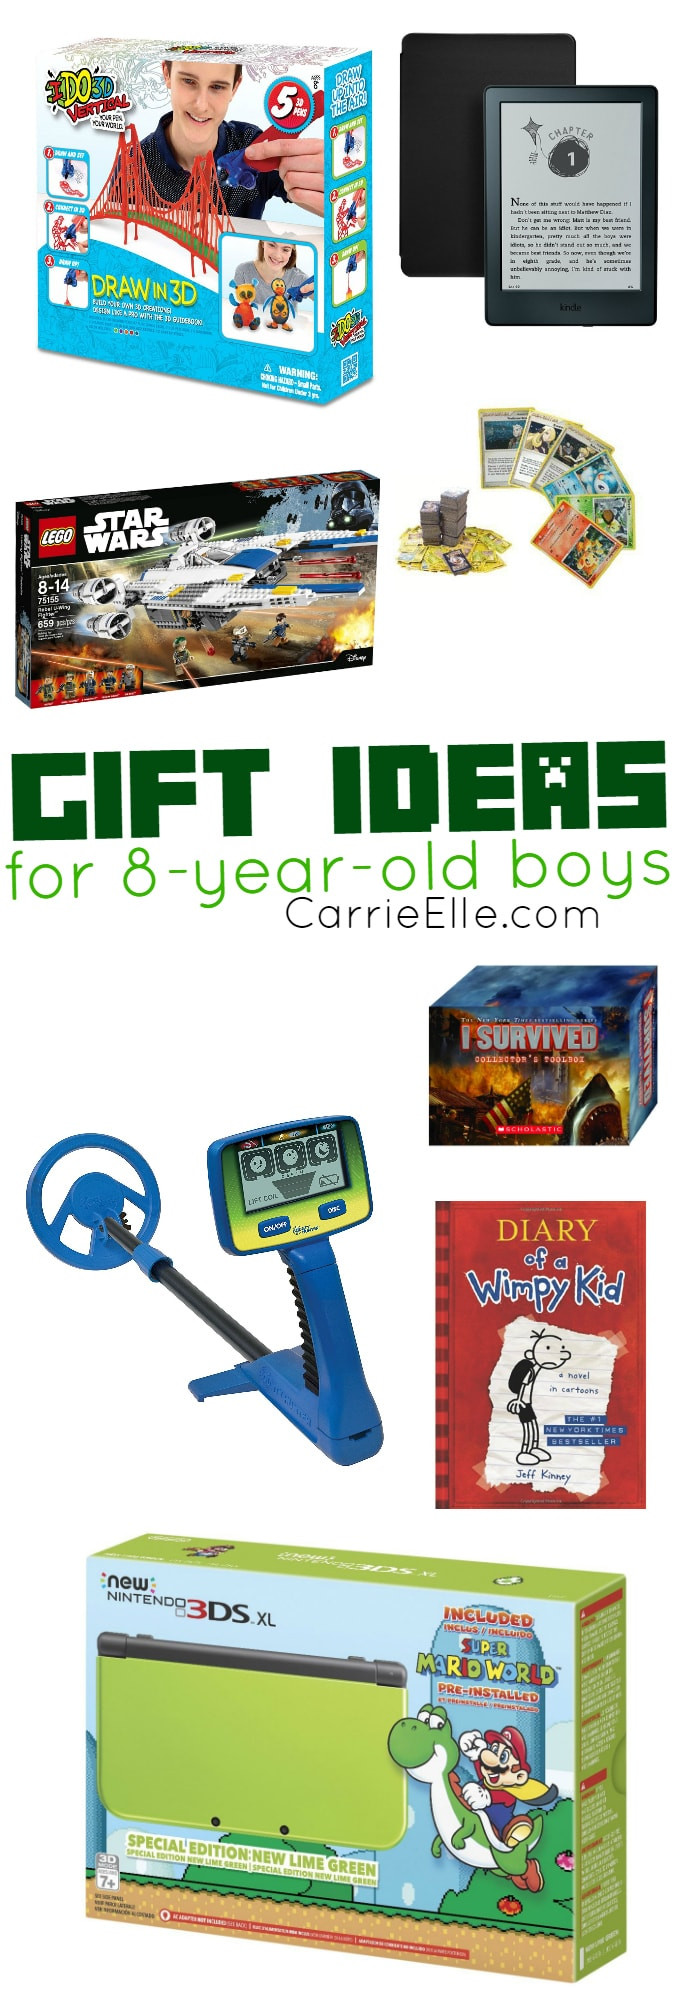 Birthday Gift Ideas For 8 Year Old Boy
 Gift Ideas for 8 Year Old Boys Carrie Elle